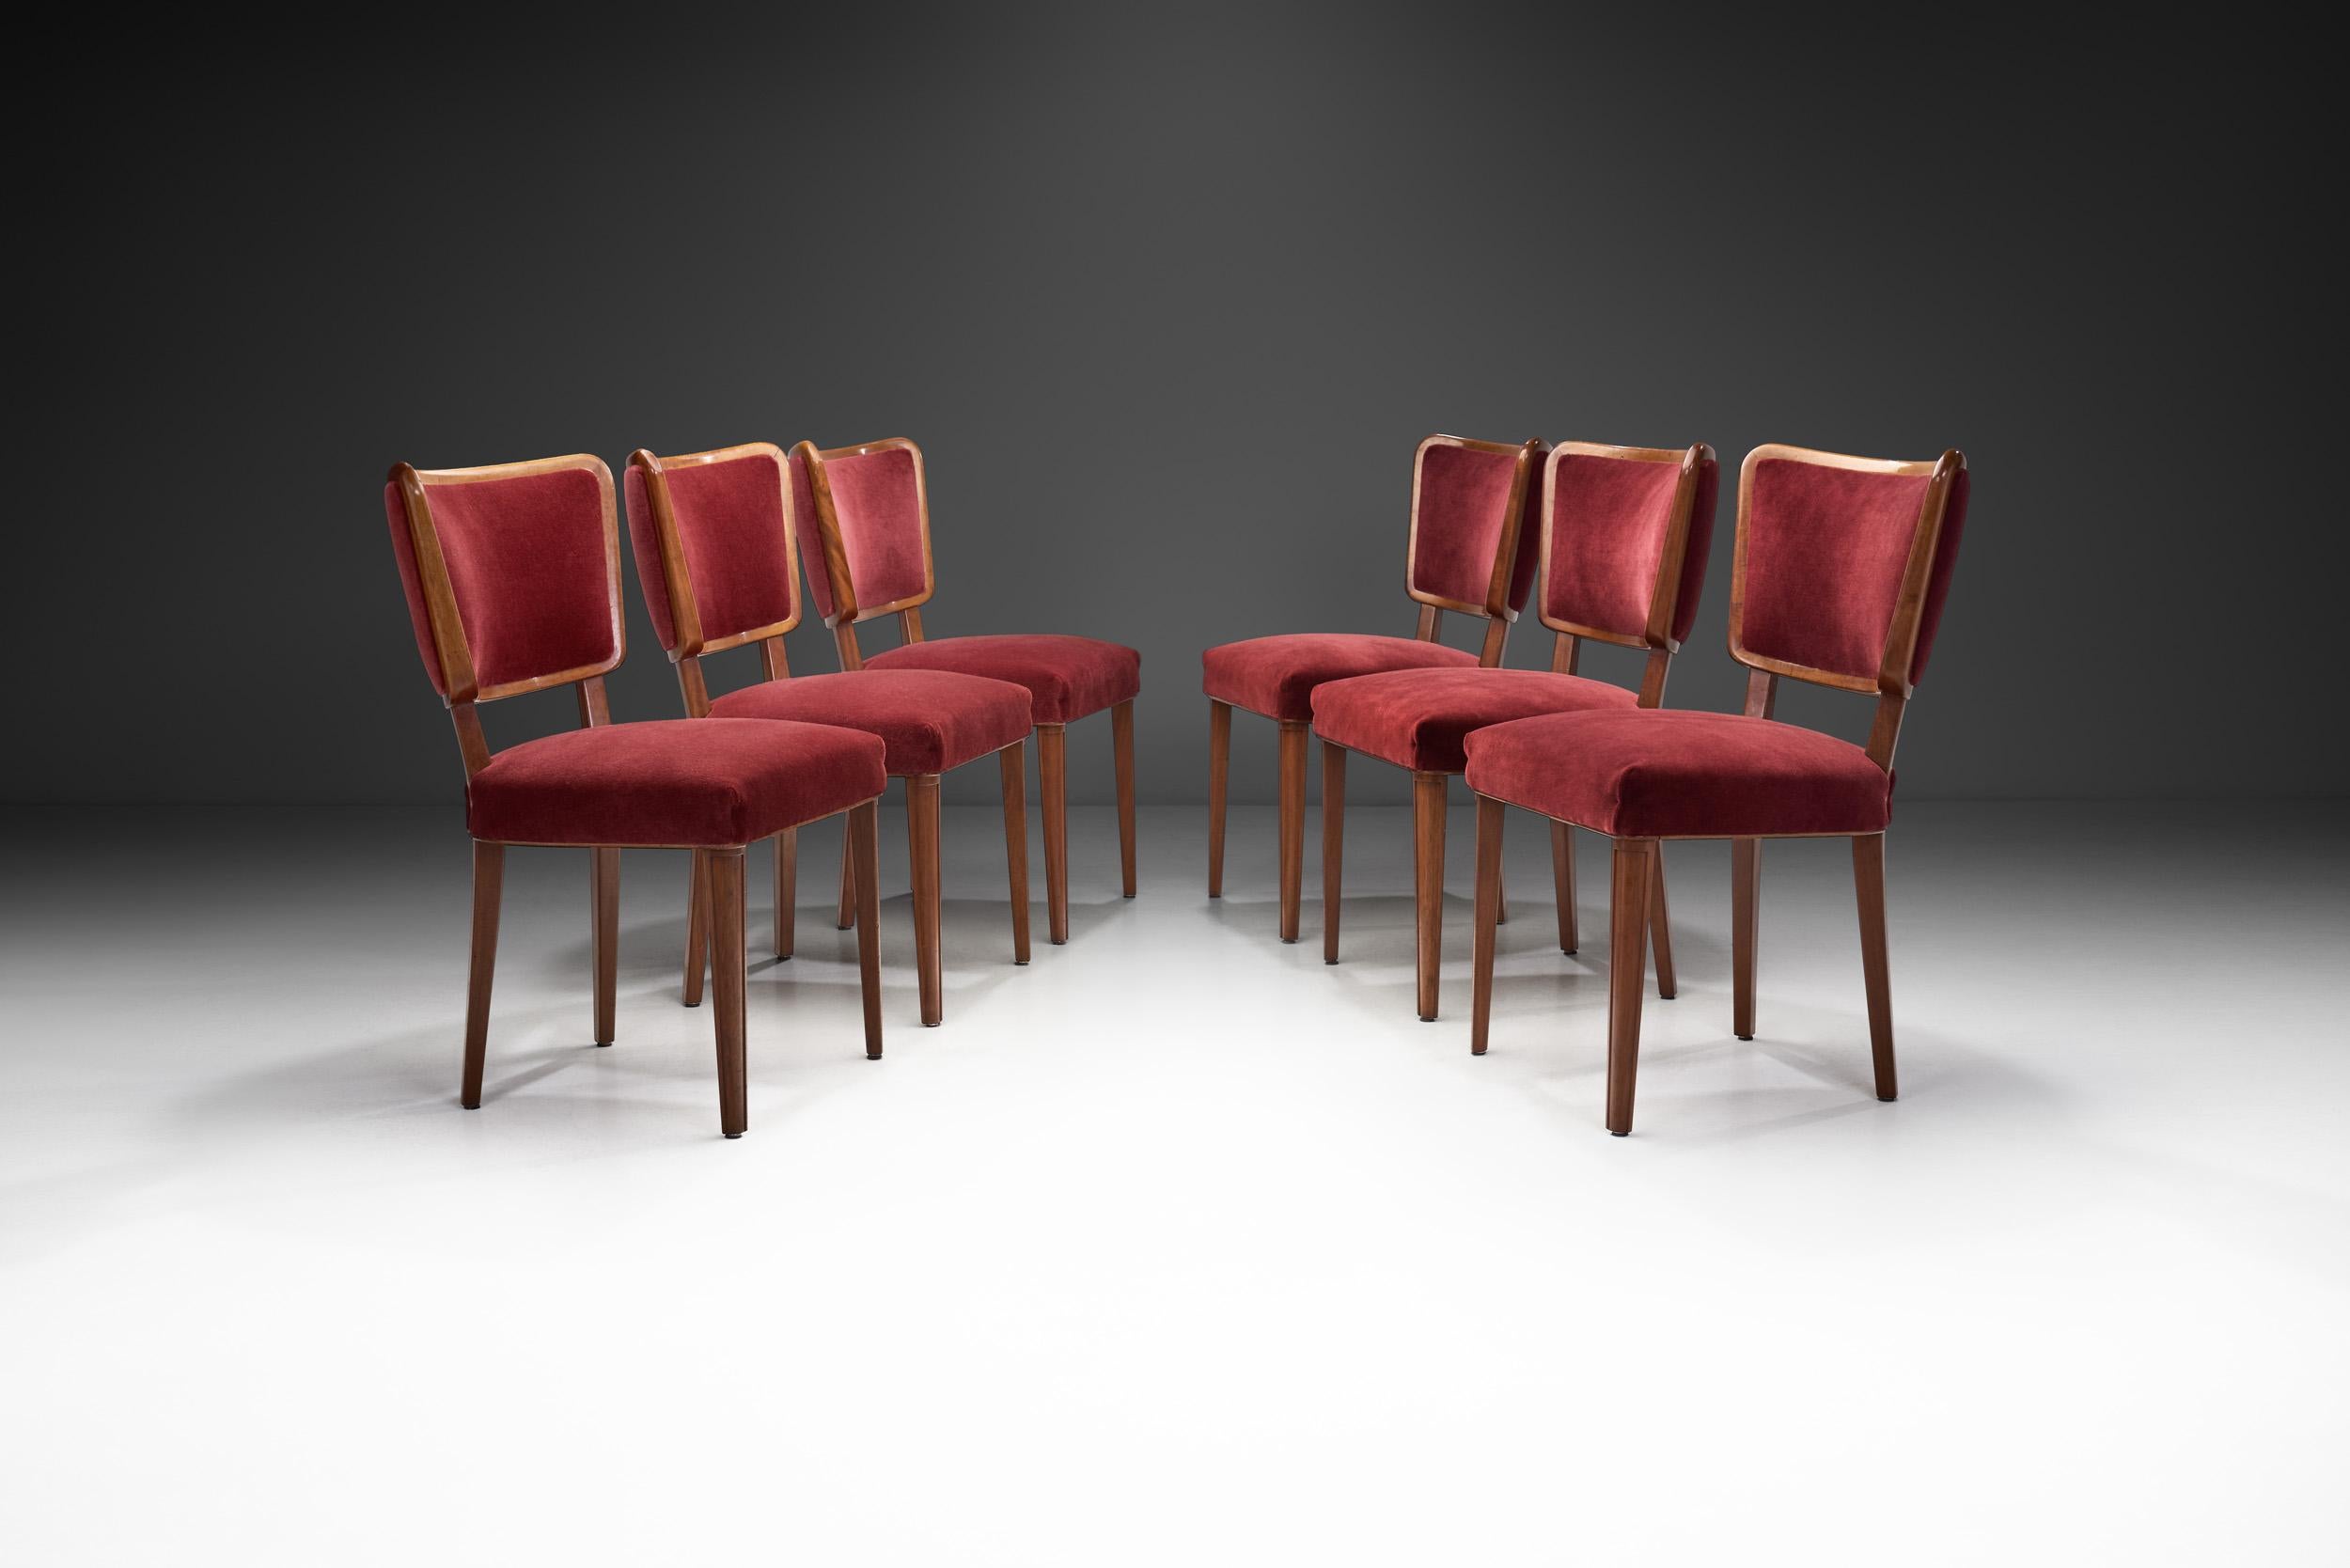 In the mid-20th century, Sweden witnessed a profound shift in design sensibilities that gave rise to the distinctive style known as Swedish Modern. At the forefront of this design movement were this set of elegant Swedish Modern 1950s chairs, a set